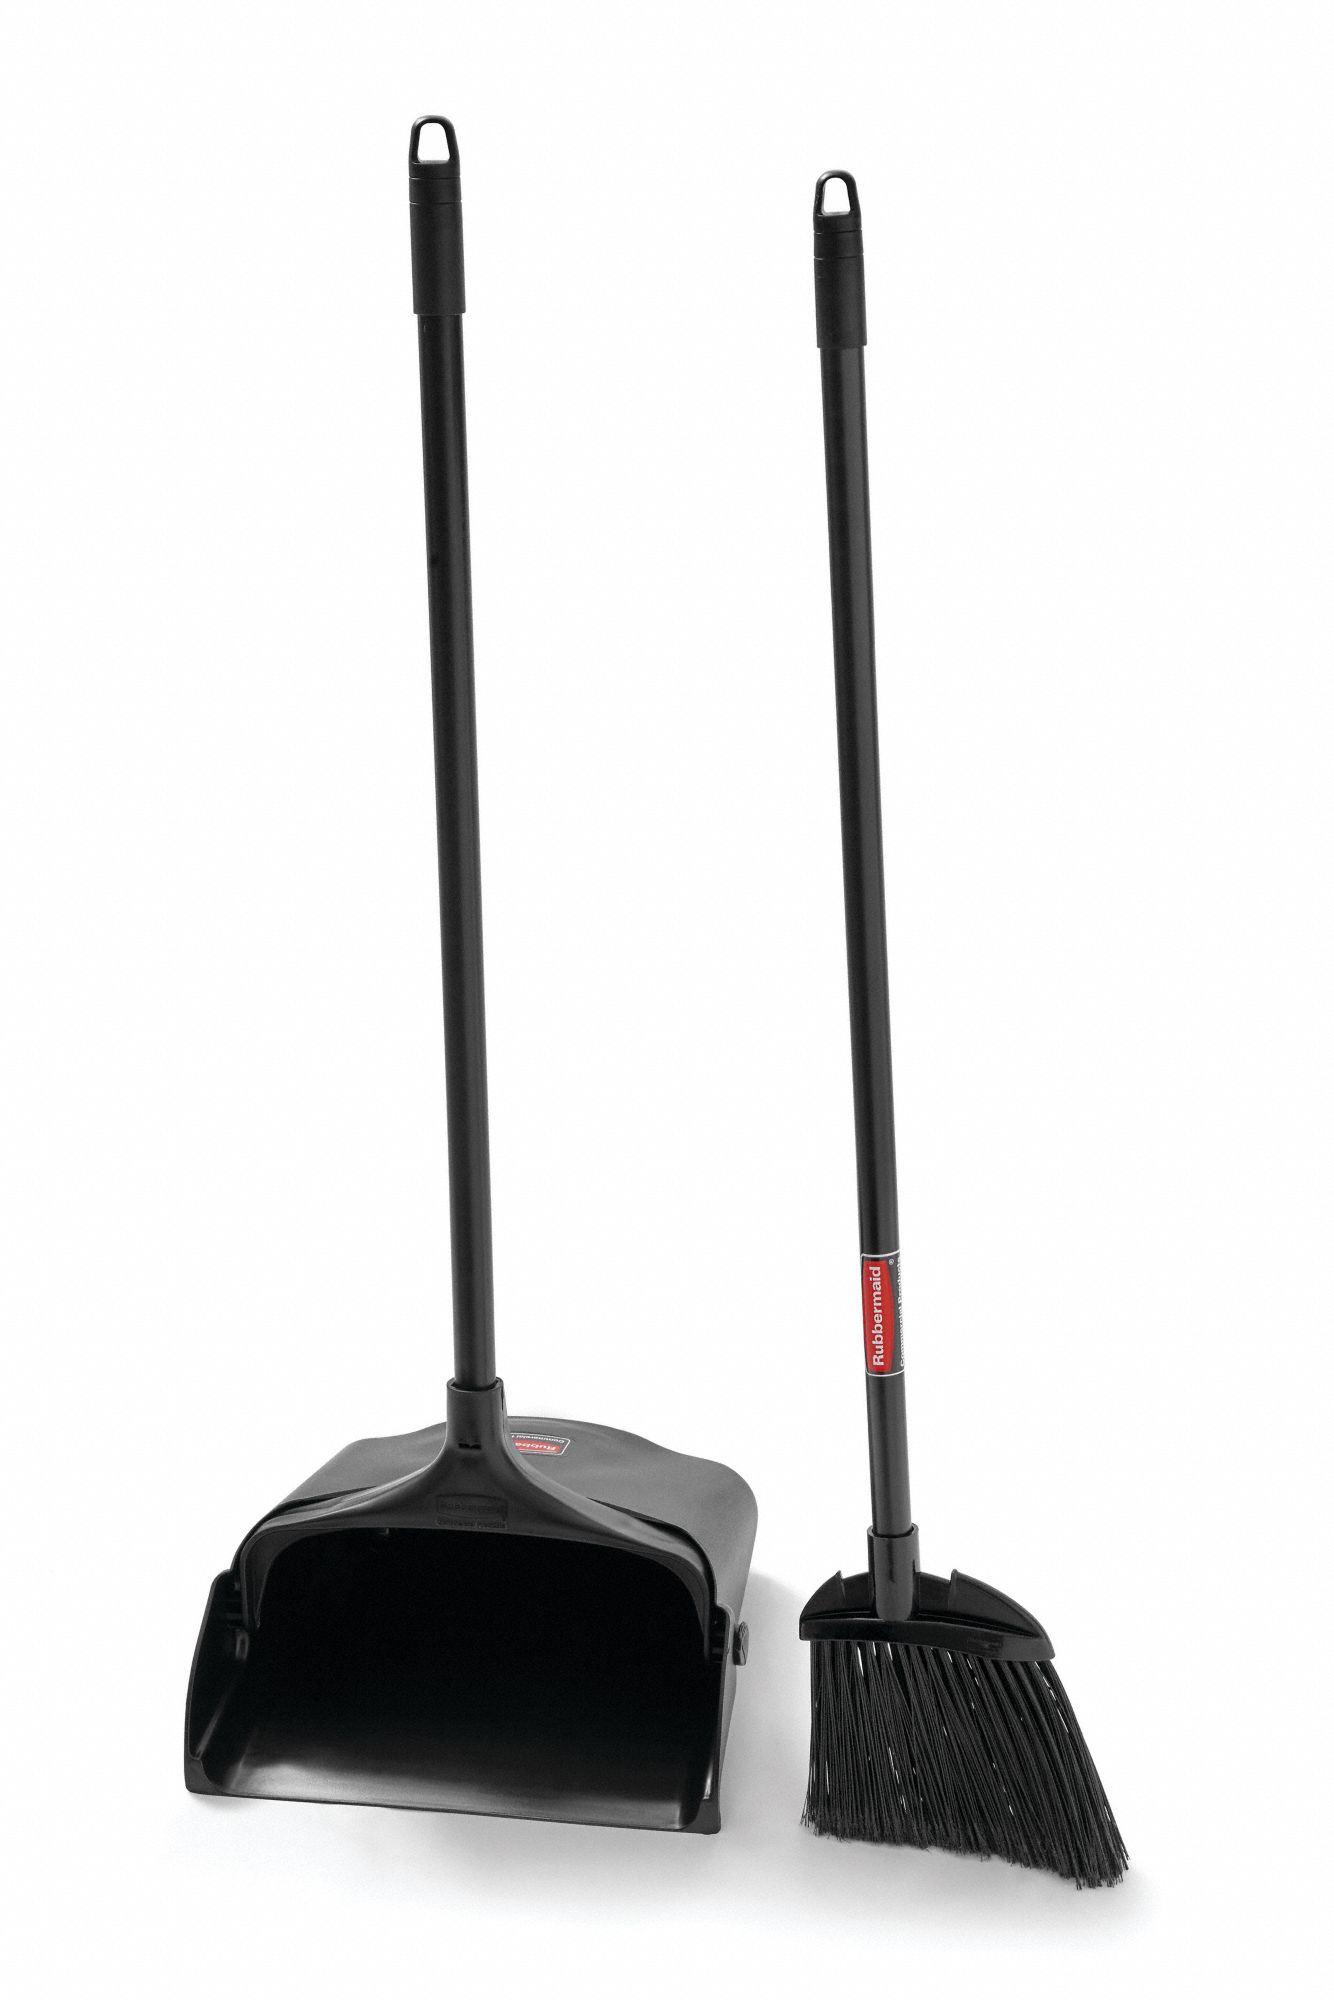 Rubbermaid Commercial Products Executive Series Lobby Broom, 7.5, Black, Brooms and Dustpans, Janitorial Supplies, Janitorial, Housekeeping and  Janitorial, Open Catalog